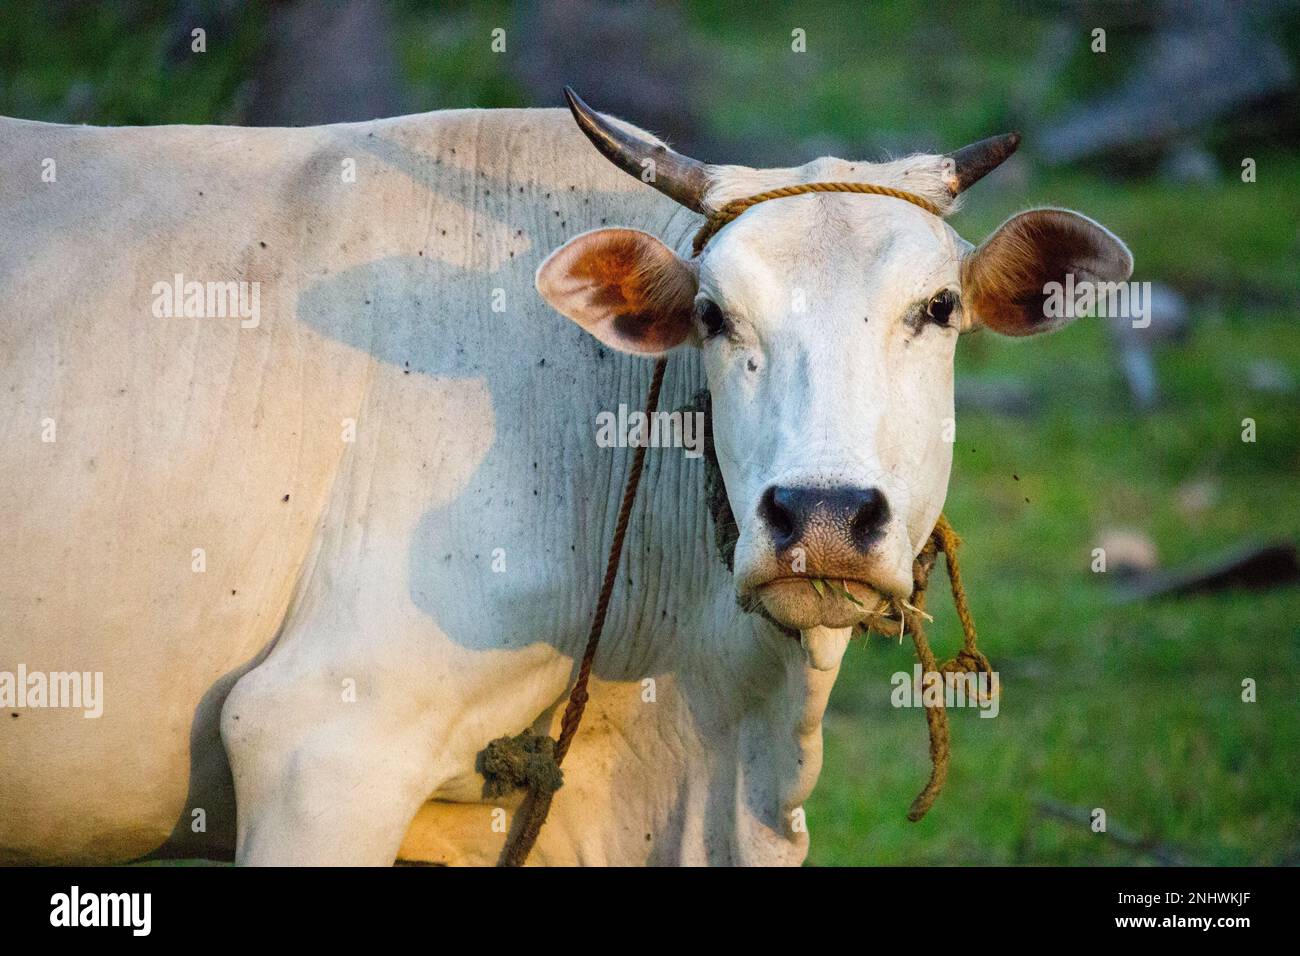 White cow with horns looking at camera in summer field. Cattle farm concept. Rural domestic animal. Cow at countryside. Sacred indian animal white cow Stock Photo